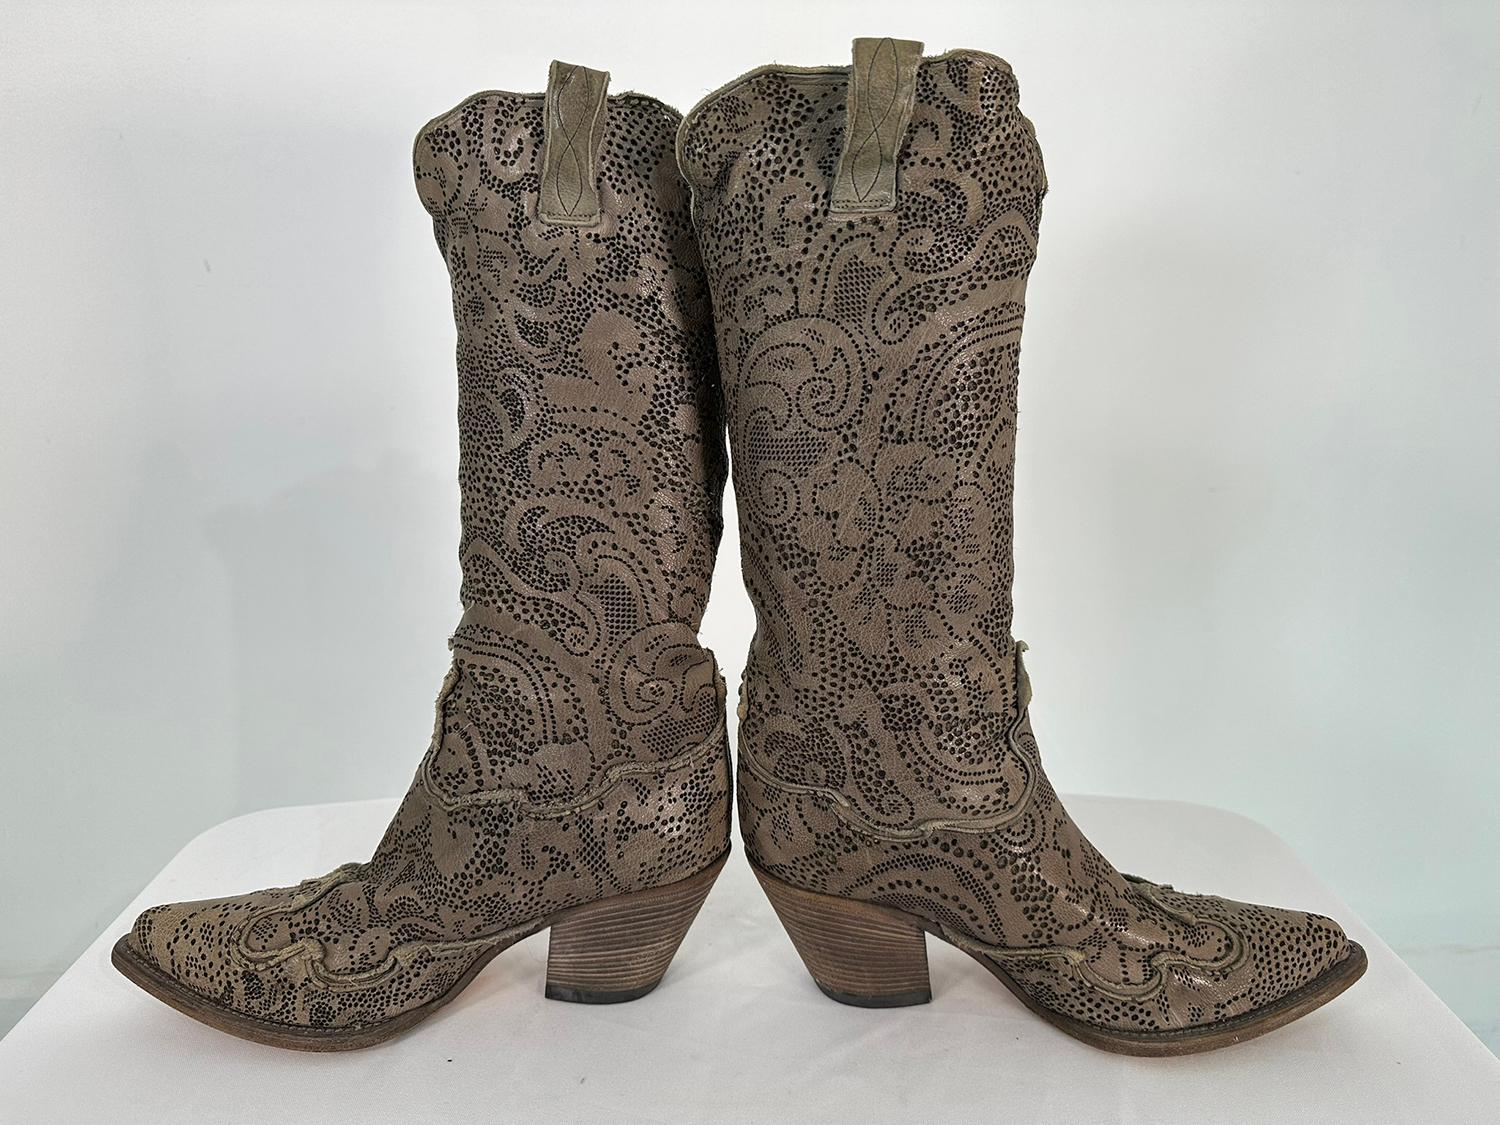 Nando Mucci grey floral lacy leather laser cut cowboy boots 39. Cowboy boots with a romantic twist, pale grey laser cut leather boots with a scrolling lacey design. Pointed toes, under slung chunky heels & scalloped tops. The boots are about 13